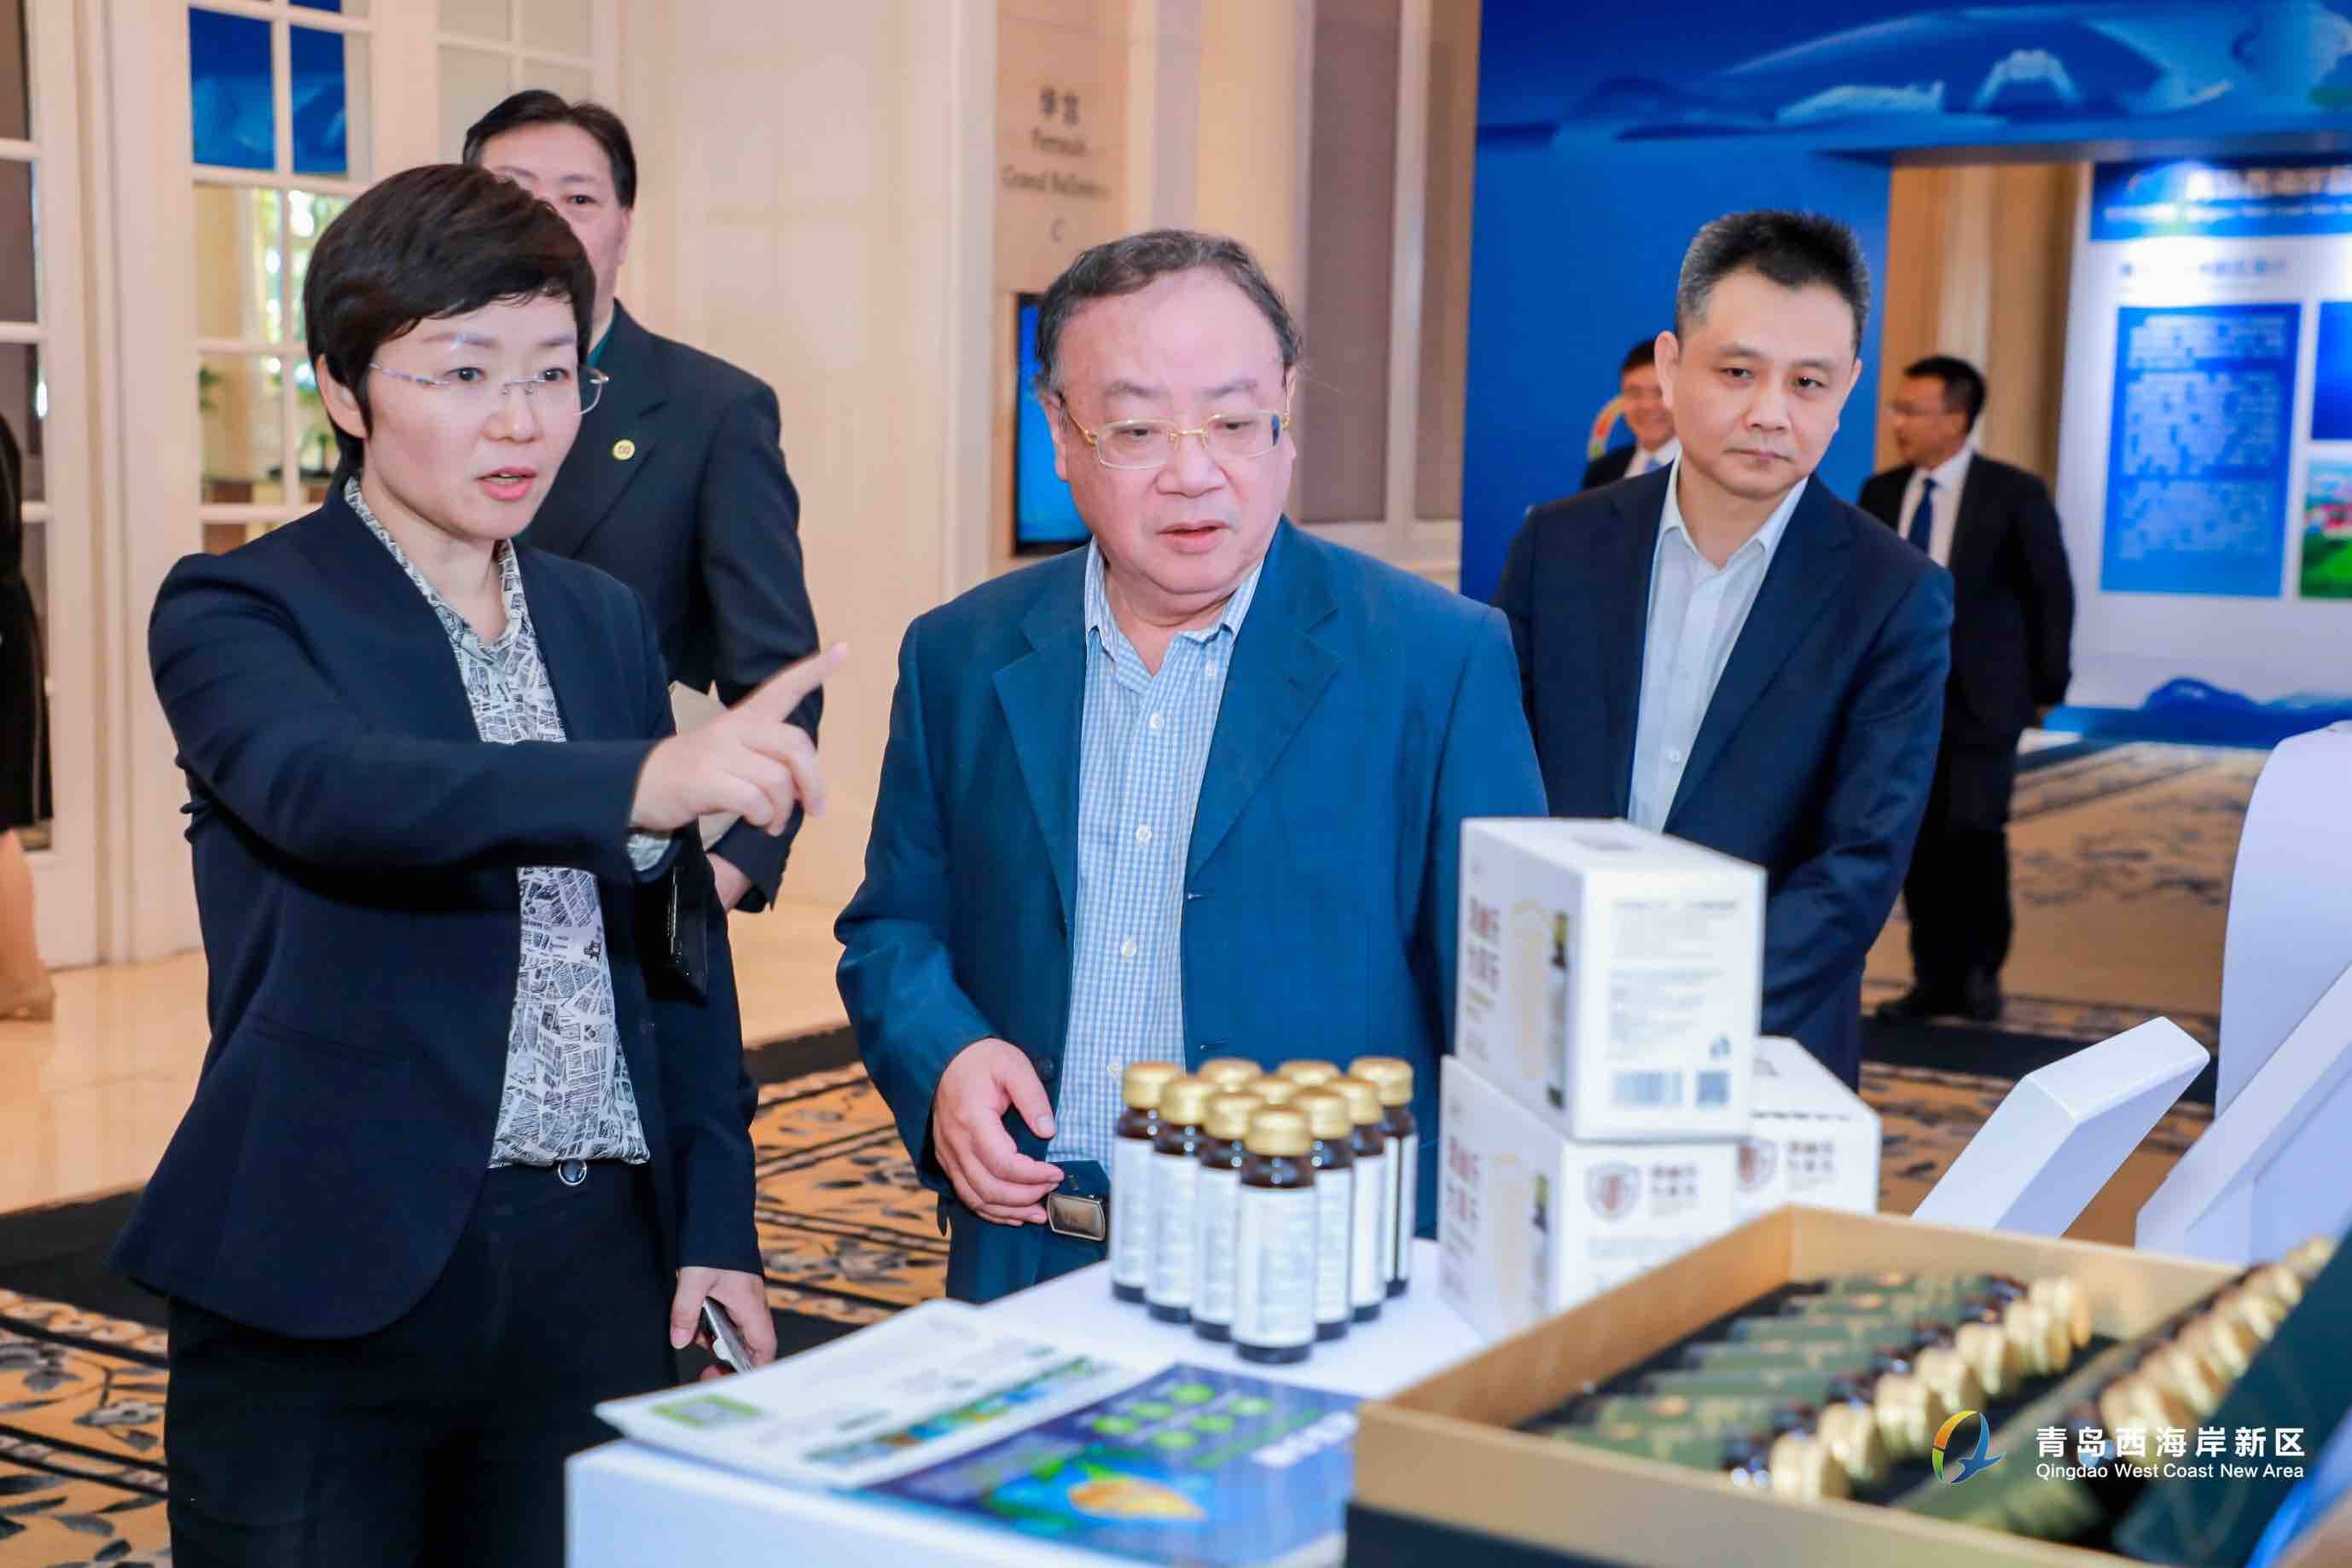 Qingdao WCNA promotes green trade in Shanghai